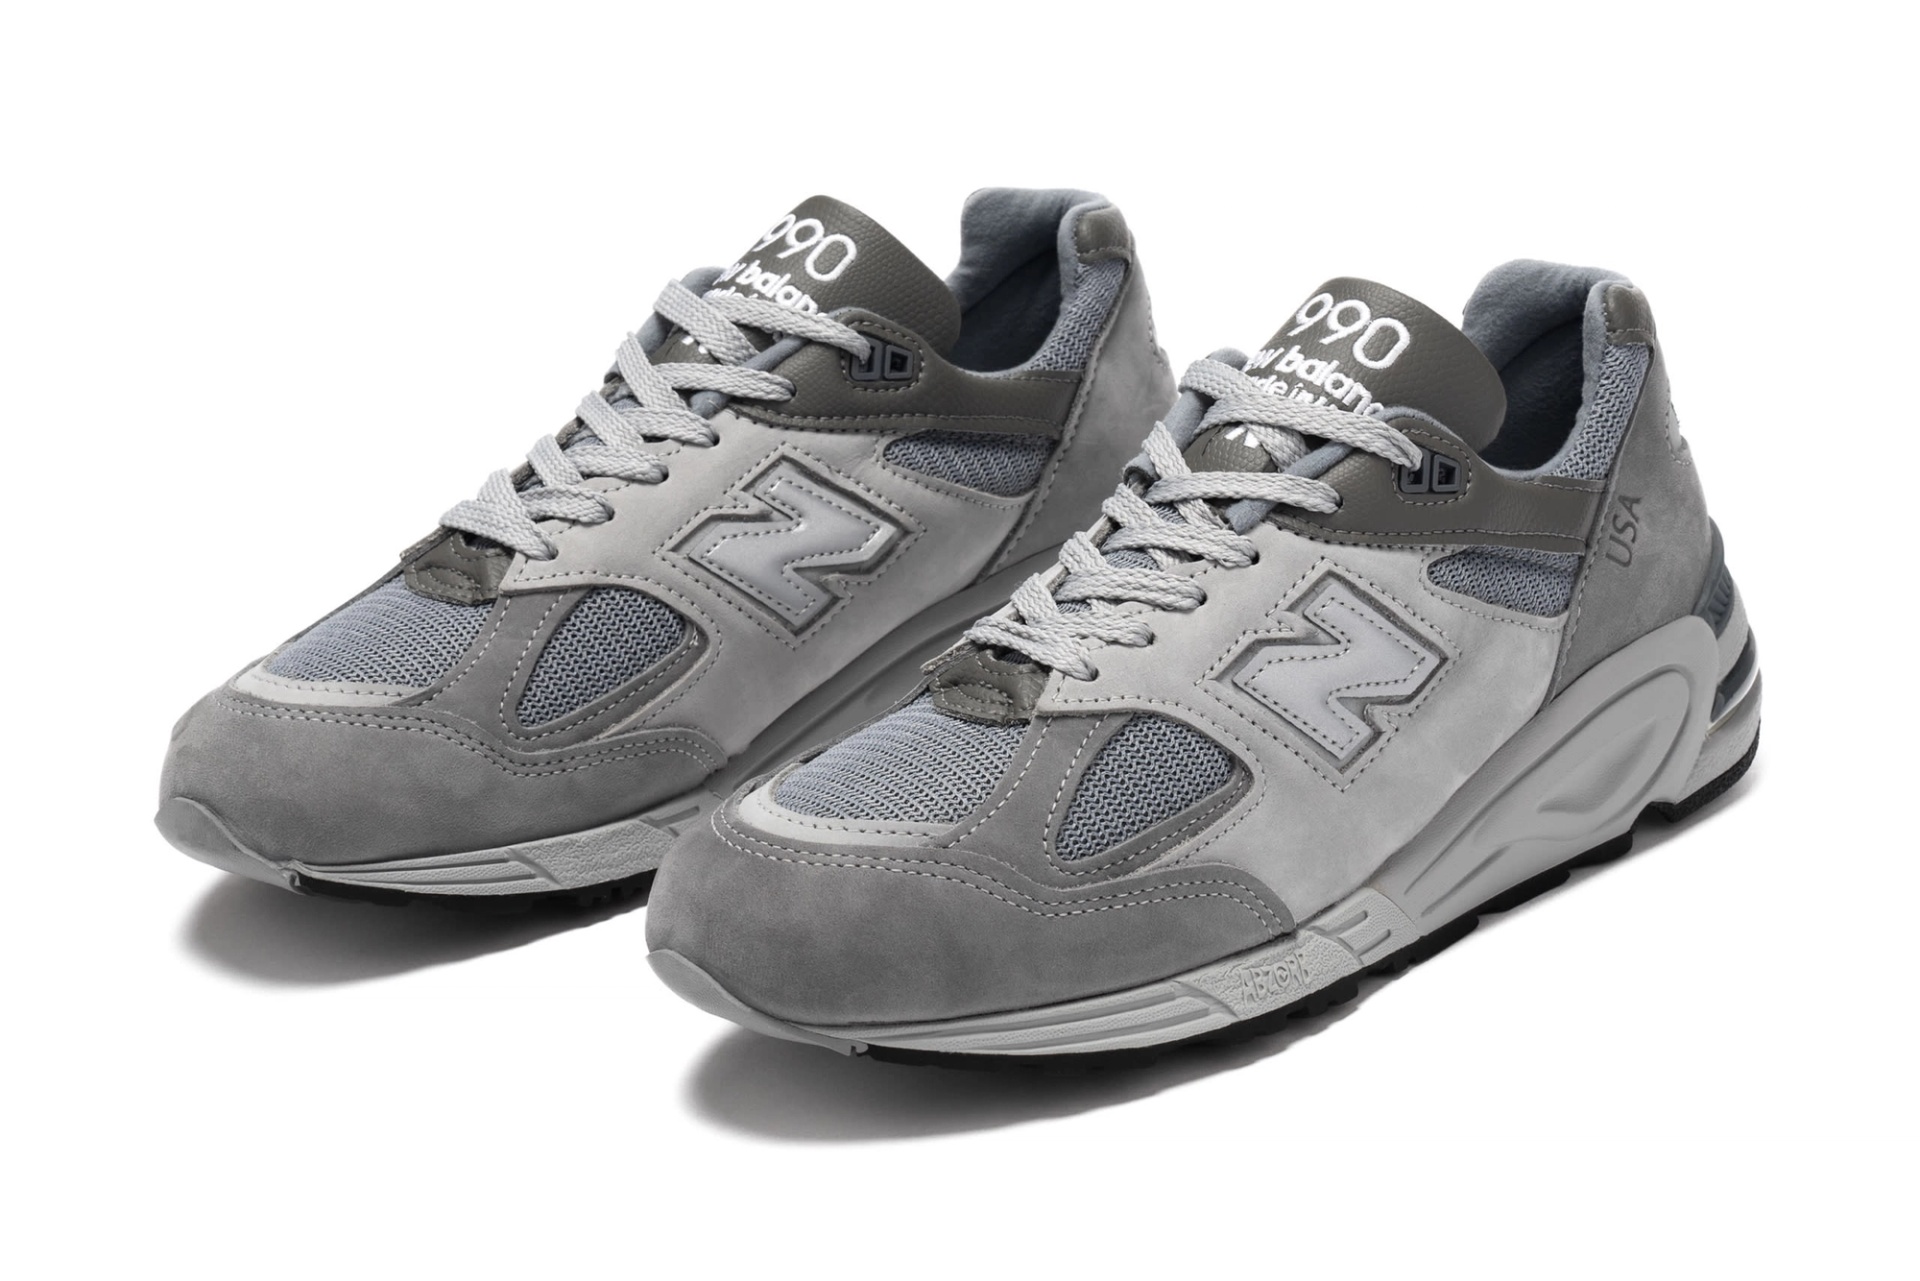 New Balance x WTAPS M990WT2 | Release Date: 09.08.21 | HAVEN